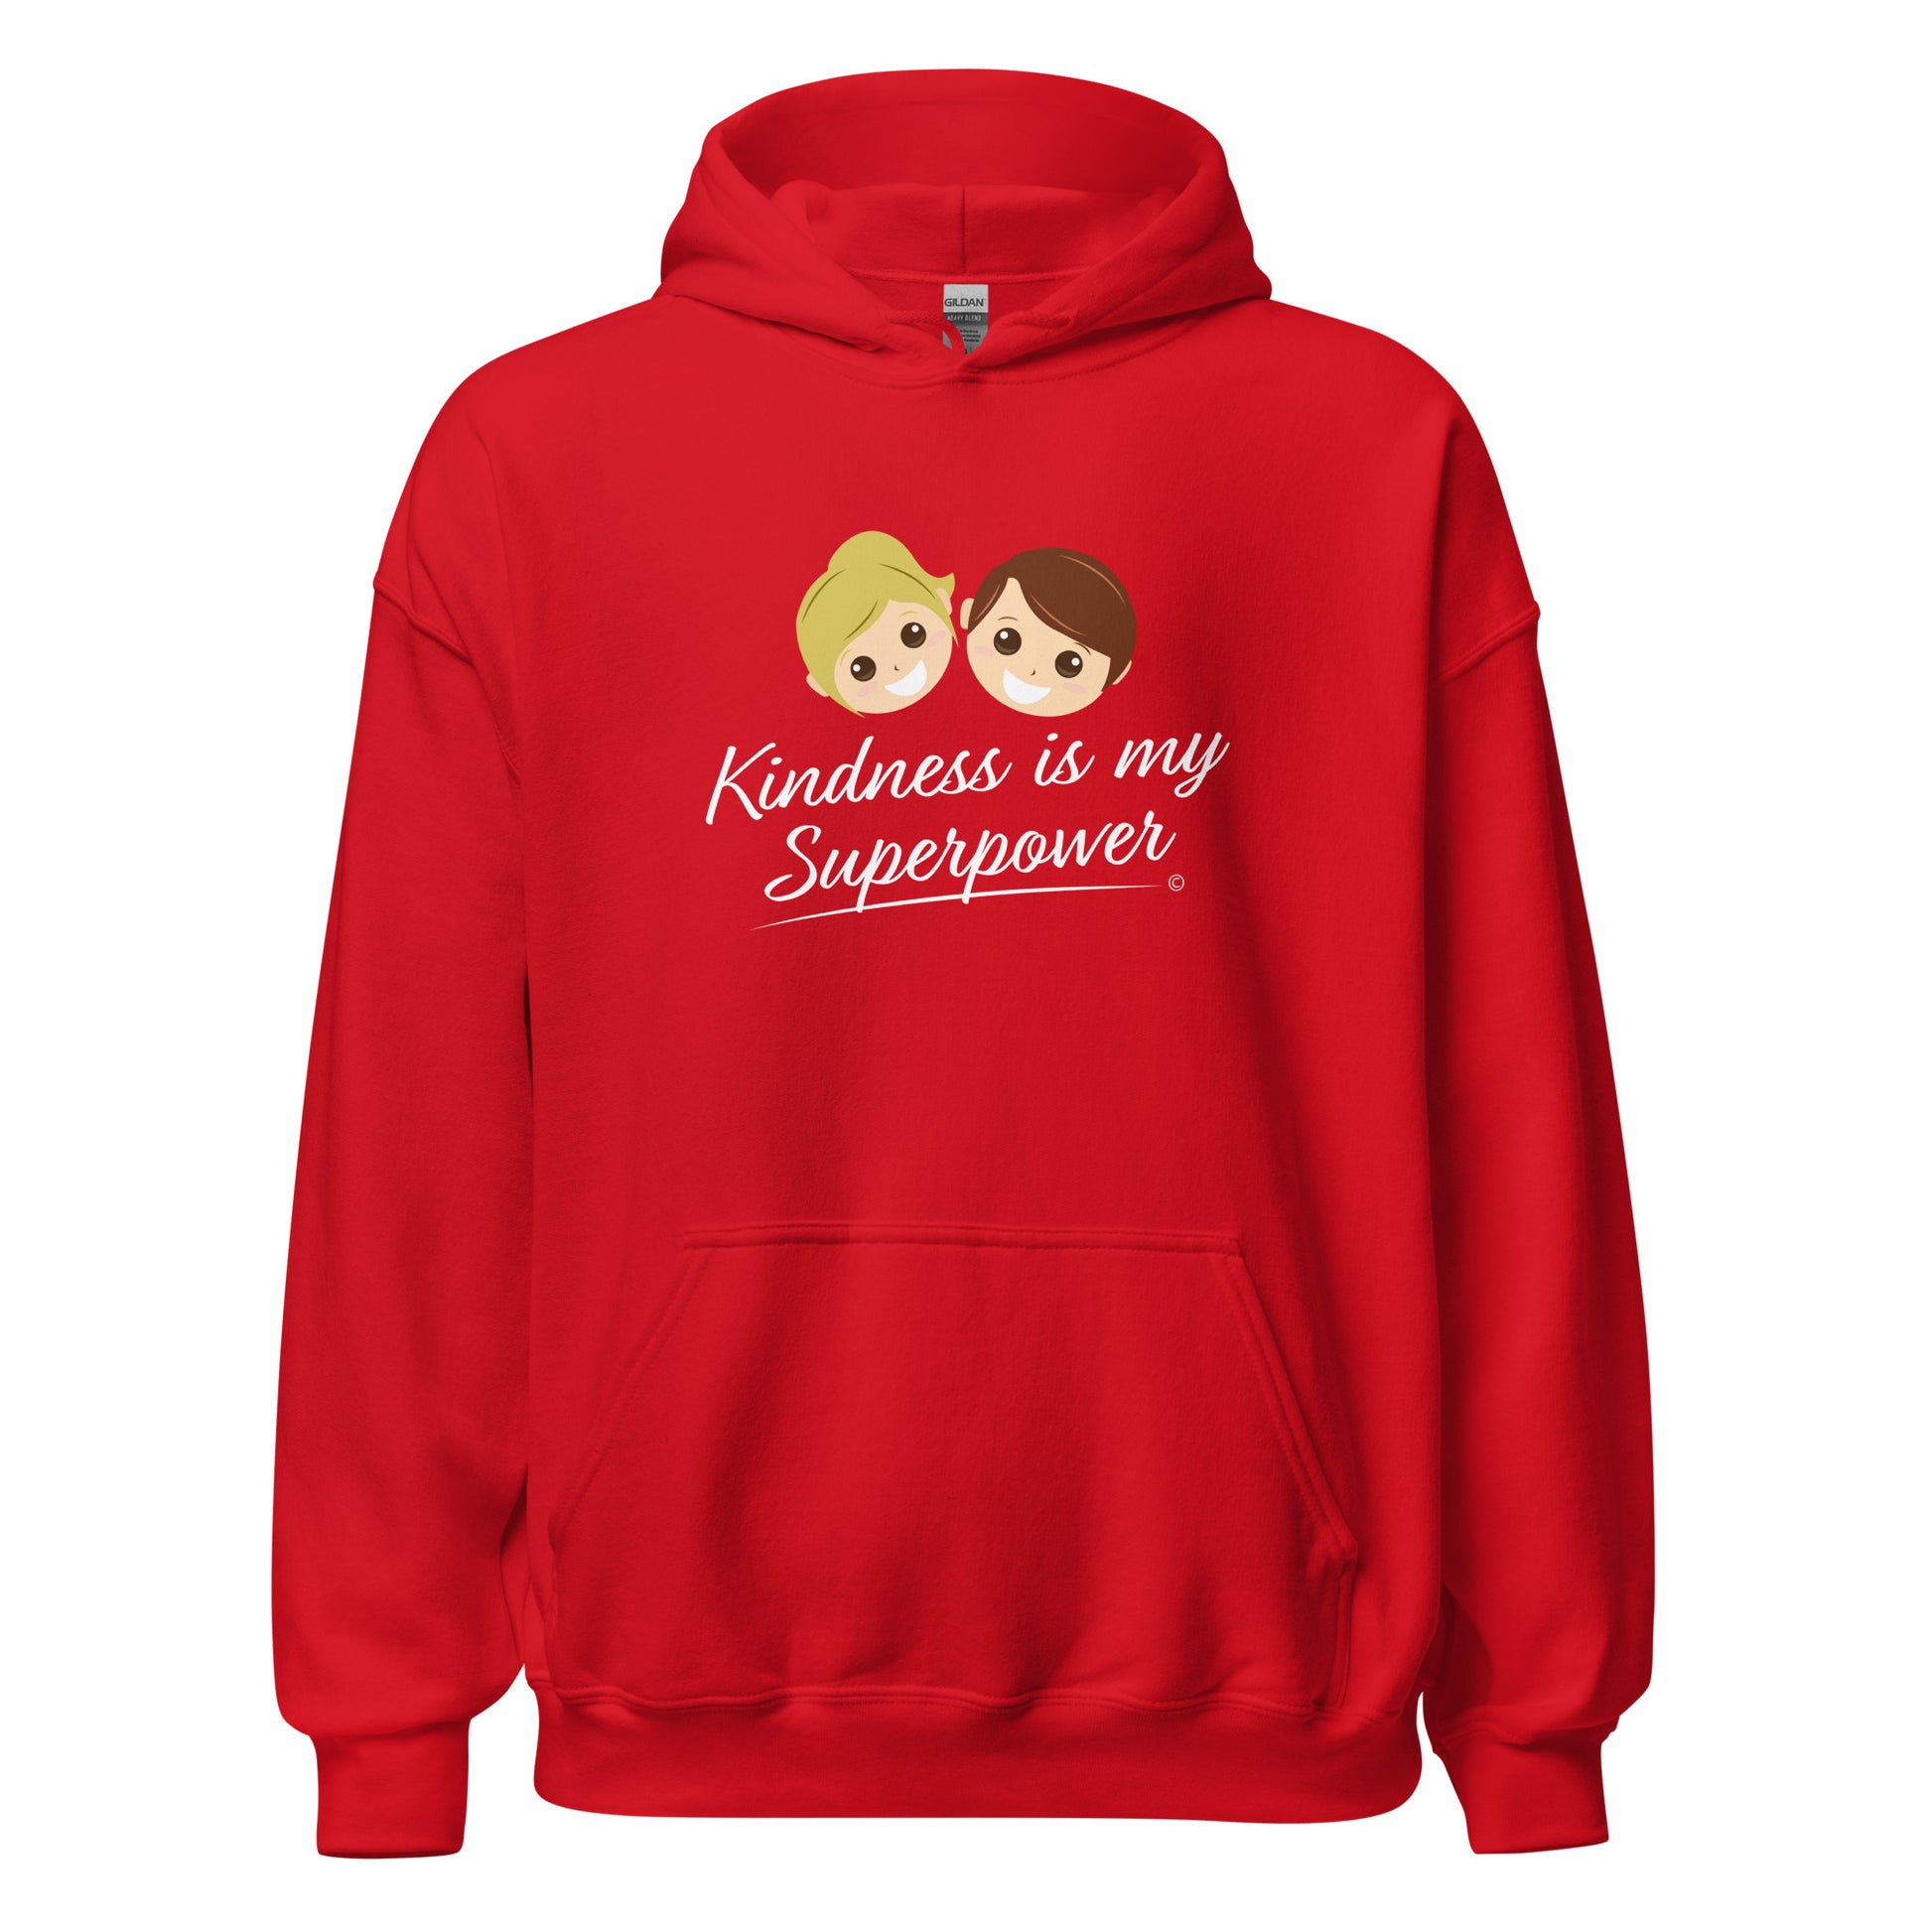 A cozy unisex hoodie in red featuring the uplifting quote 'Kindness is my Superpower' in bold lettering.